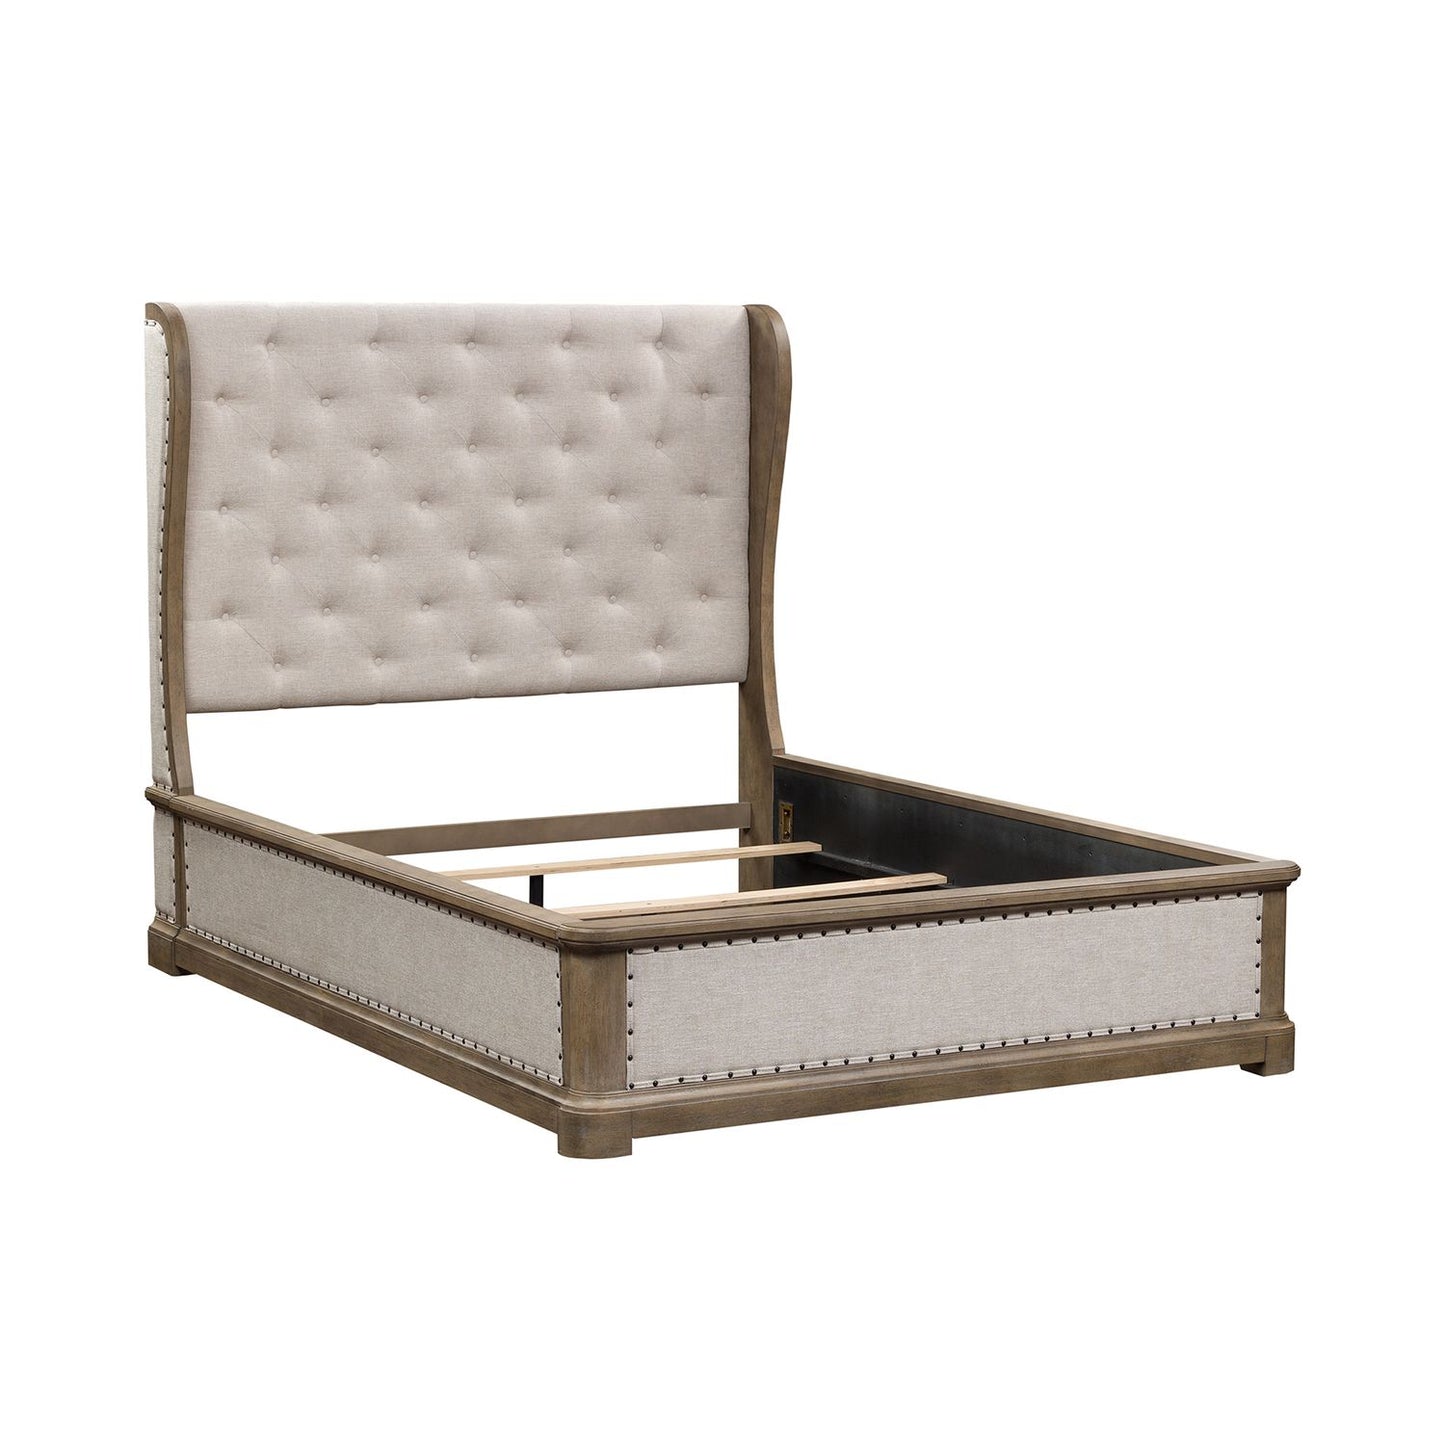 Town & Country - Queen Shelter Bed